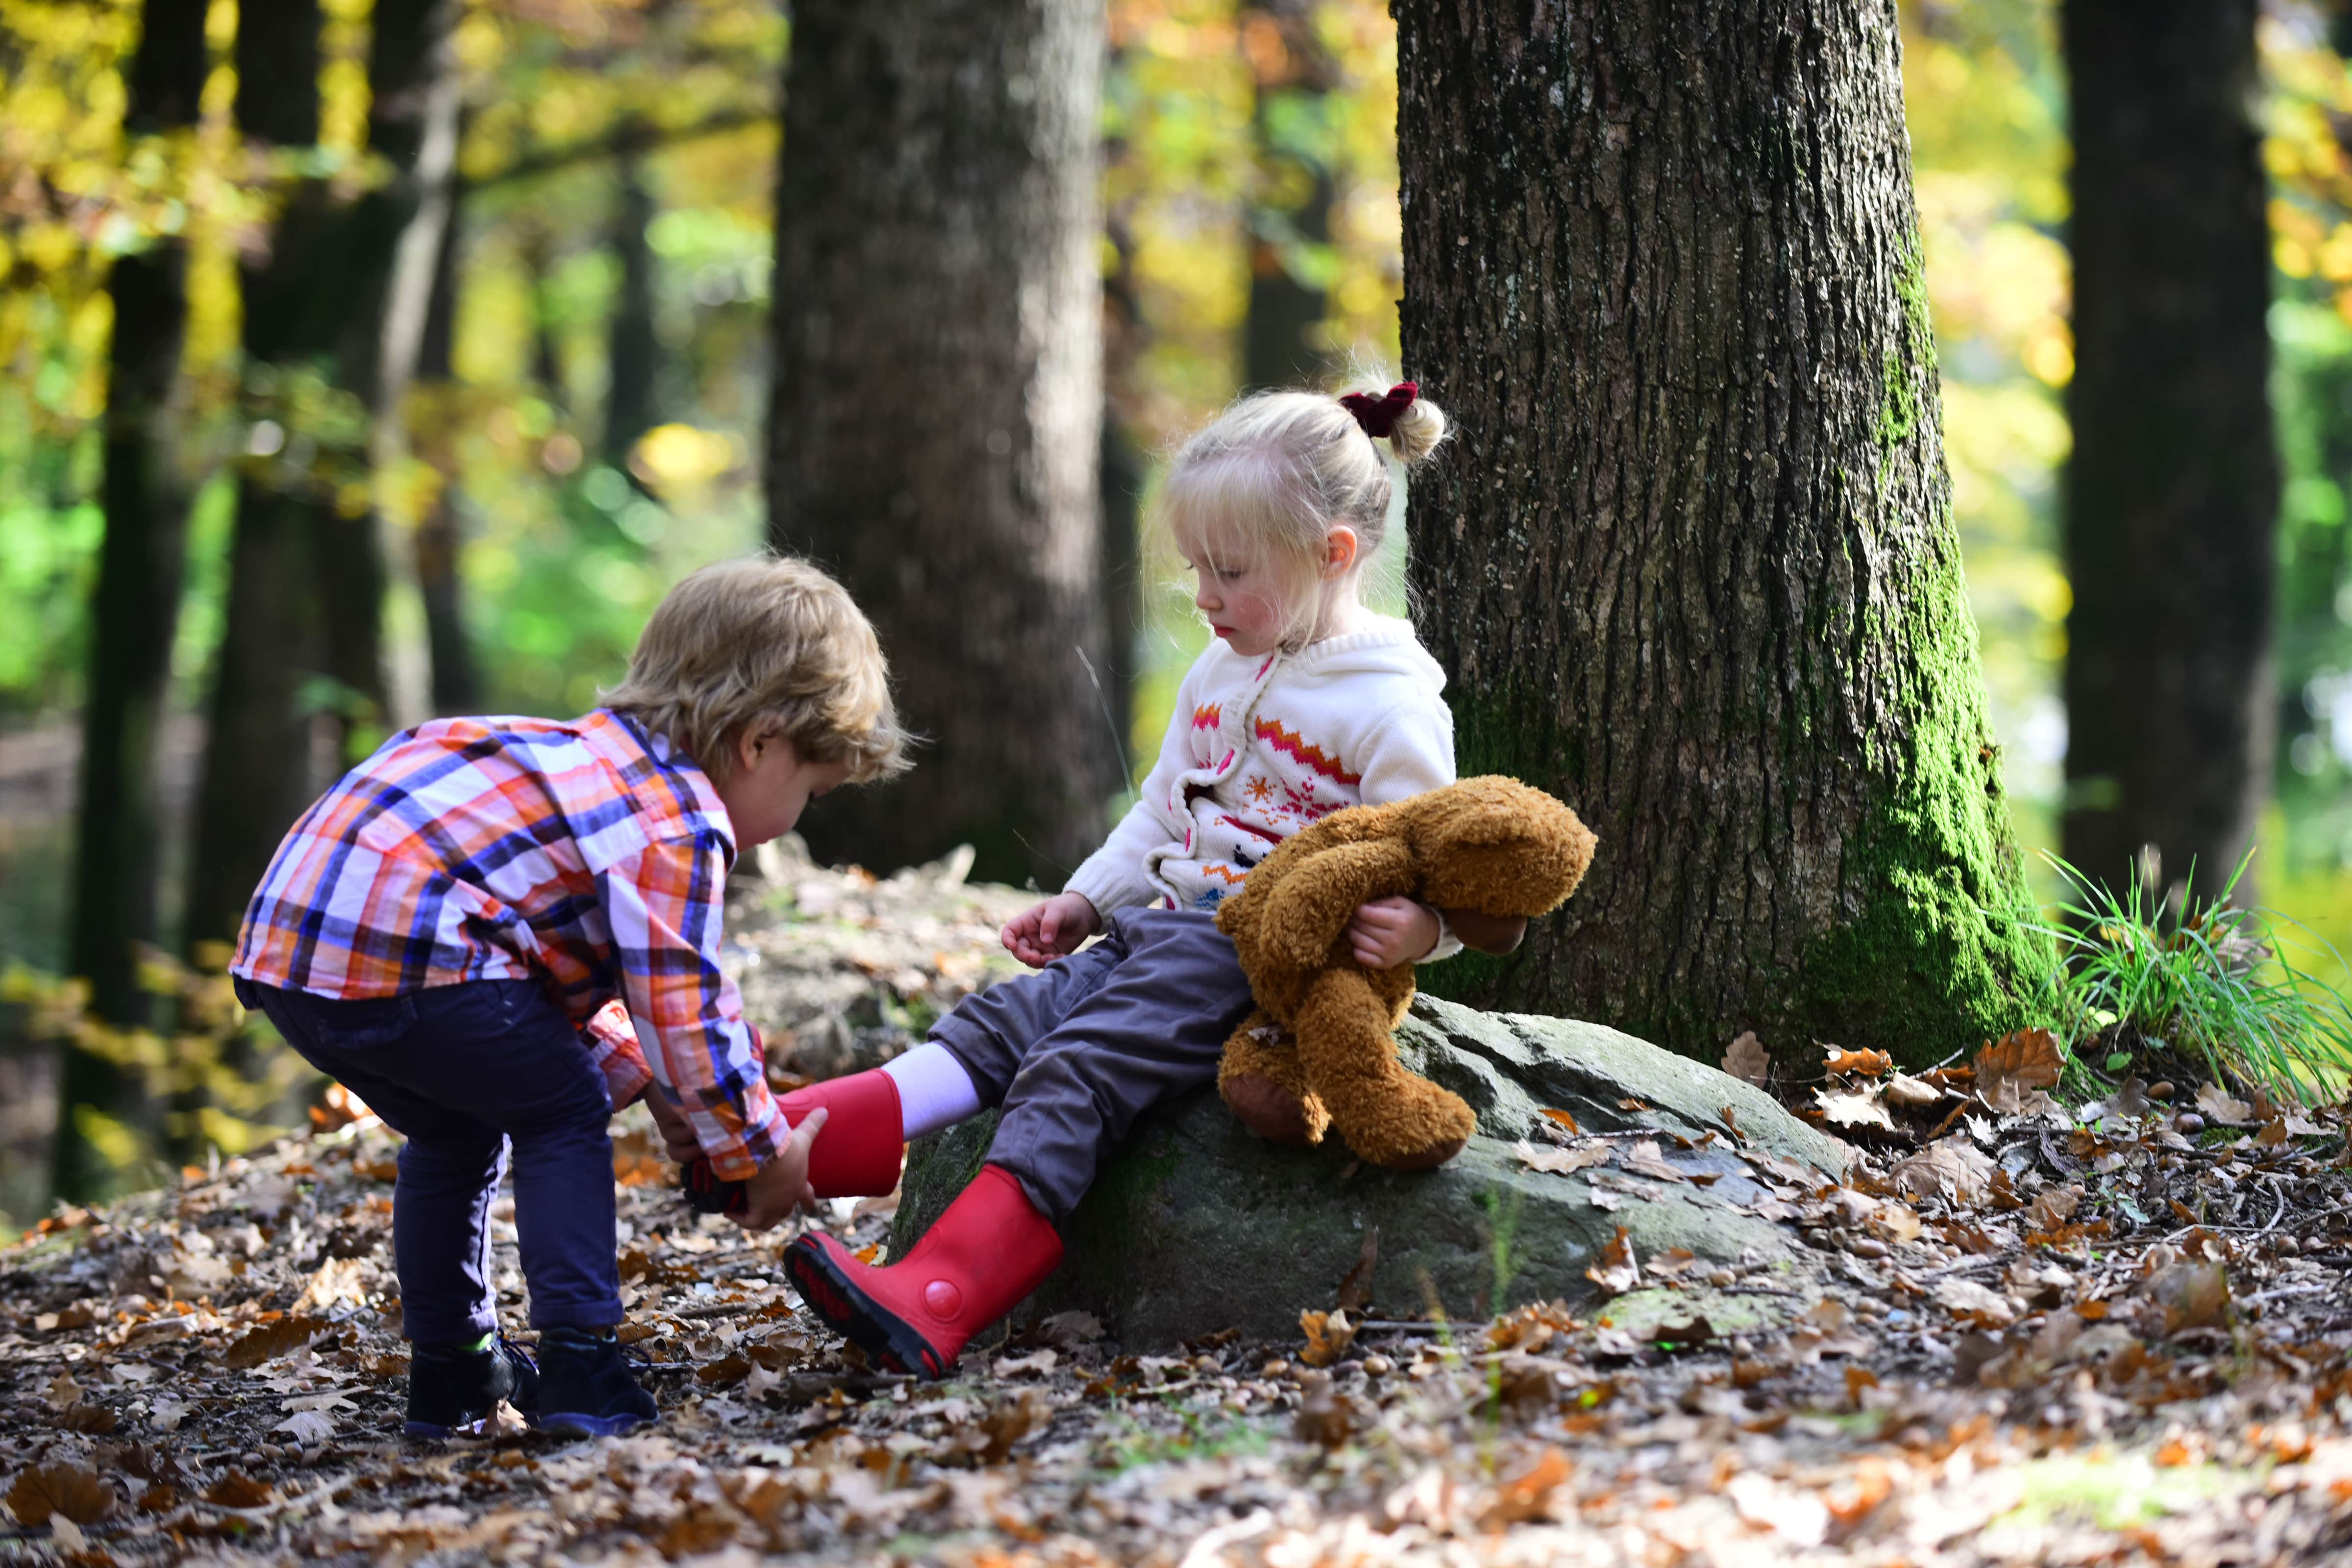 A little boy is helping a little girl take off her wellies. They are in a wood.